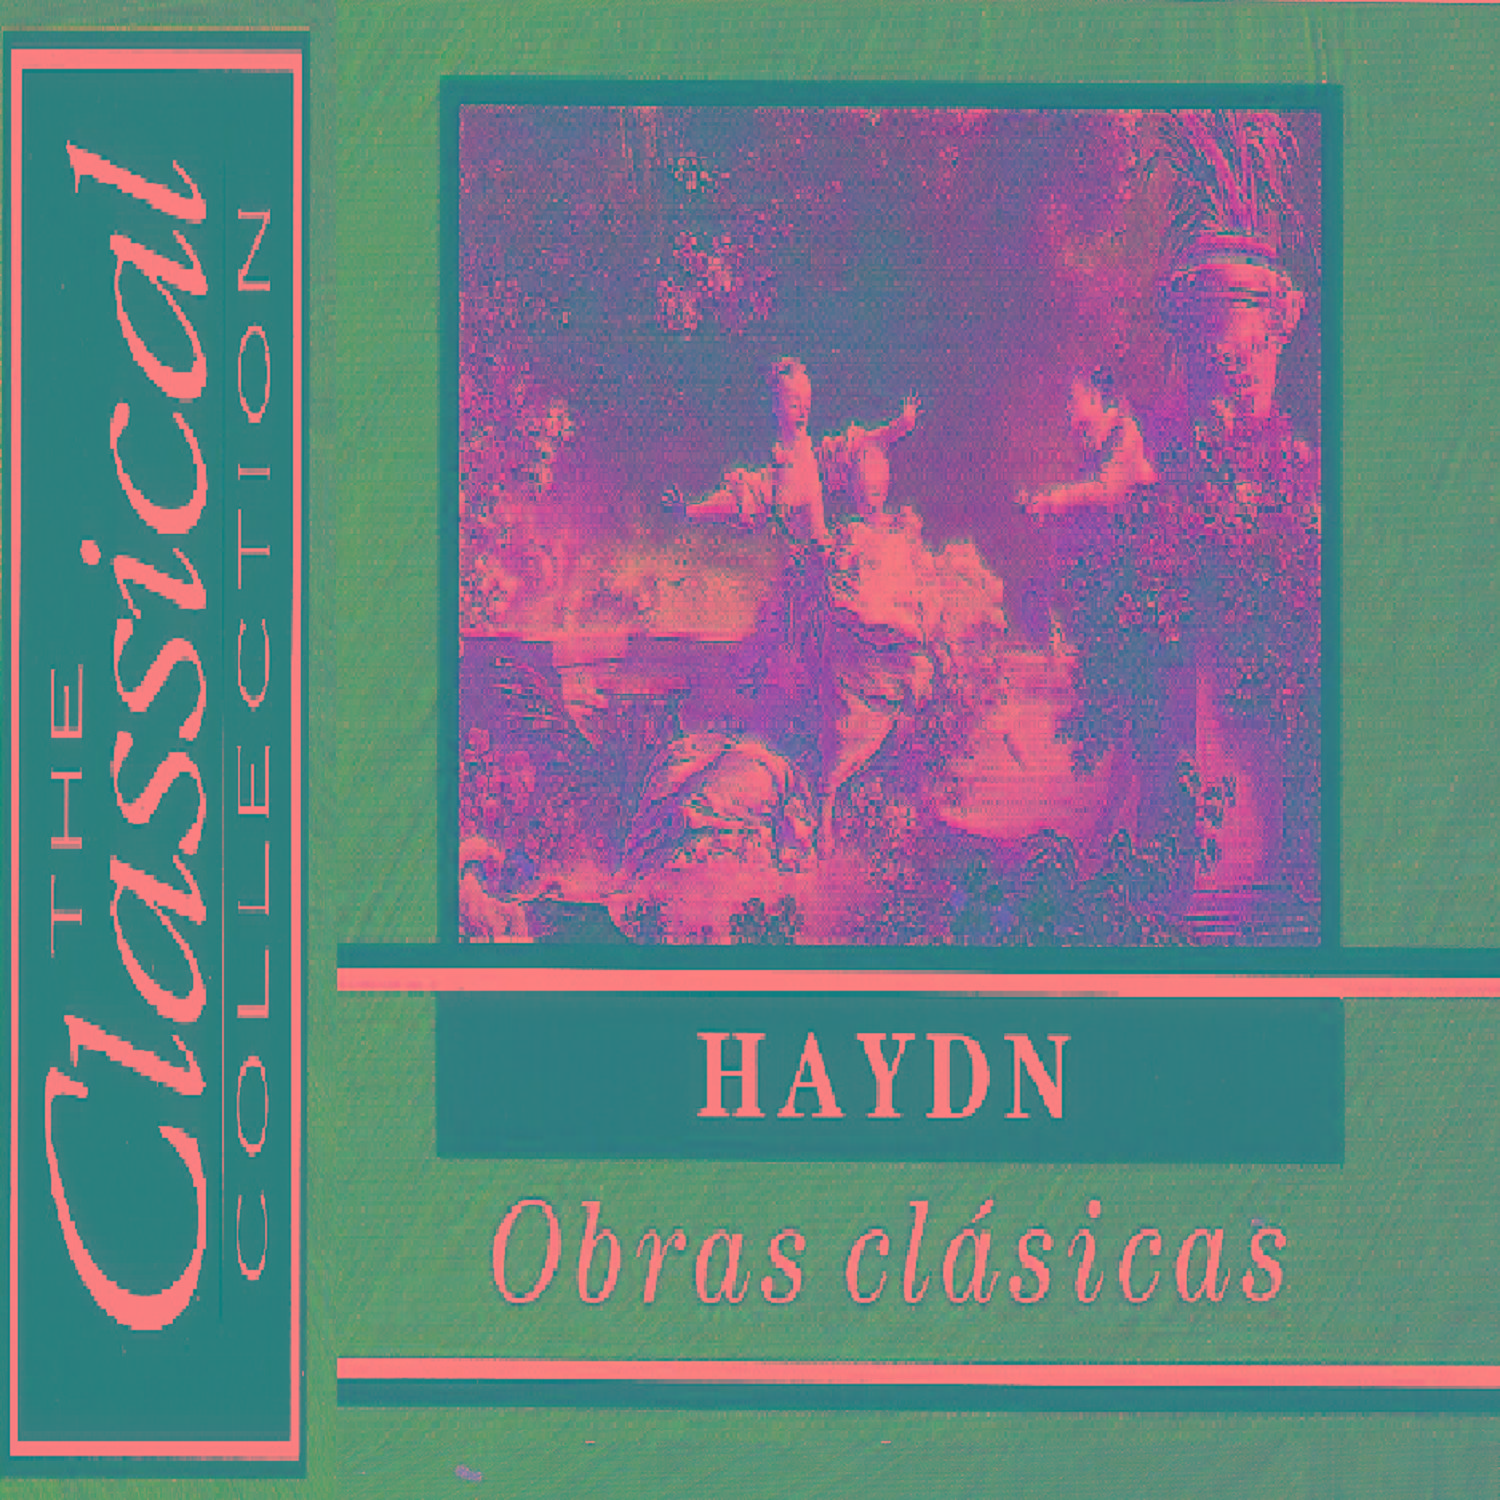 The Classical Collection  Haydn  Obras cla sicas